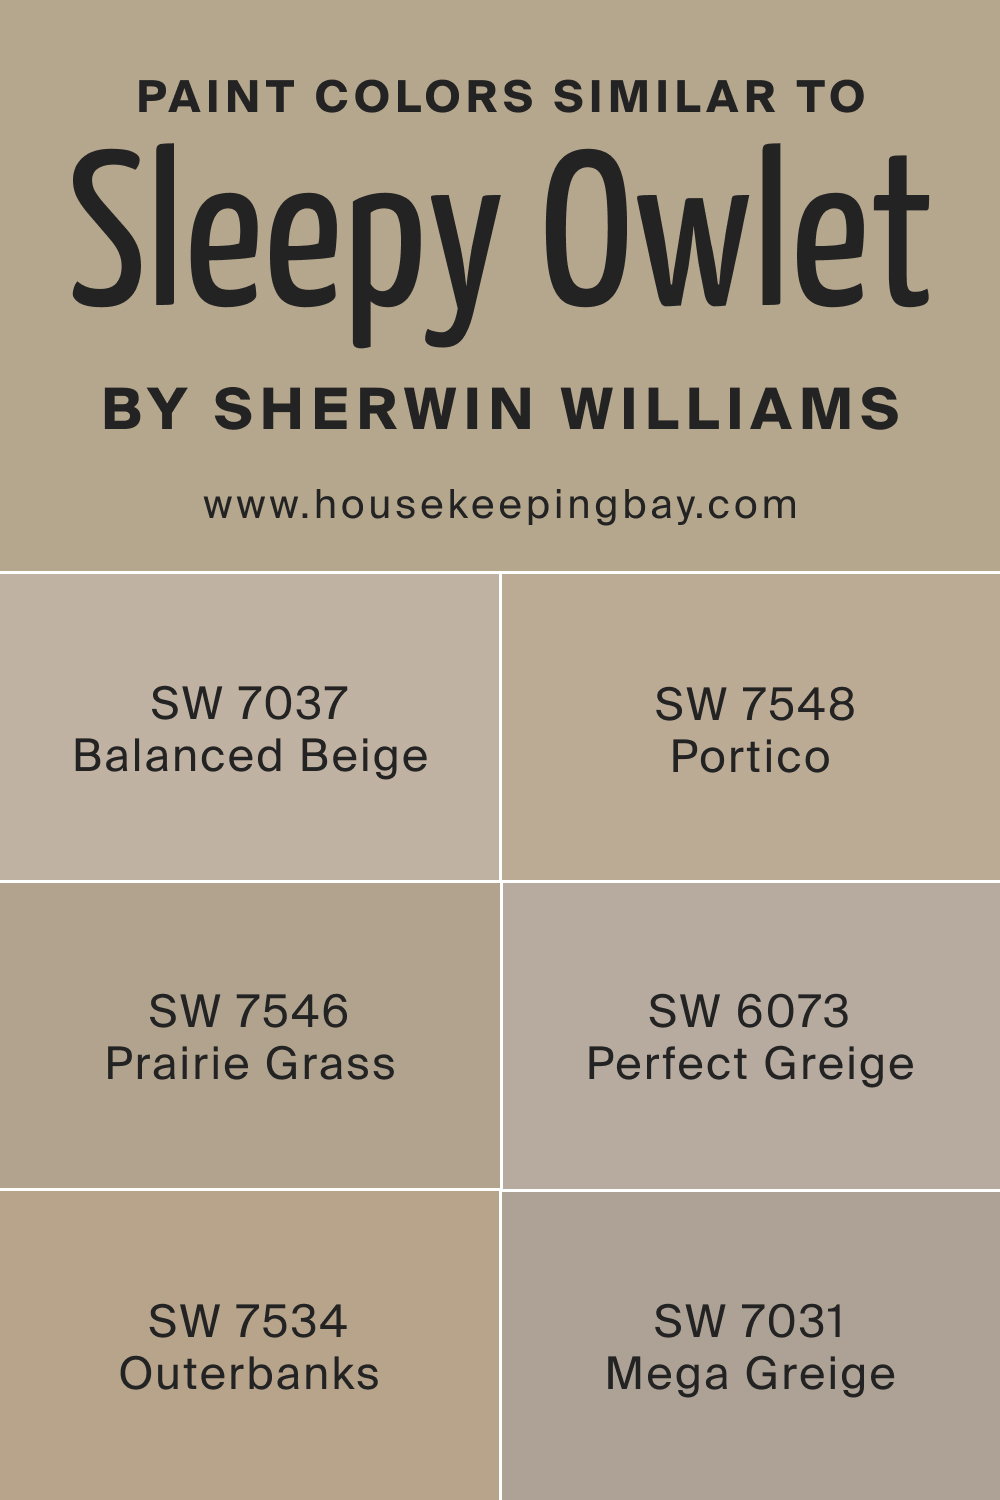 Paint Color Similar to SW 9513 Sleepy Owlet by Sherwin Williams